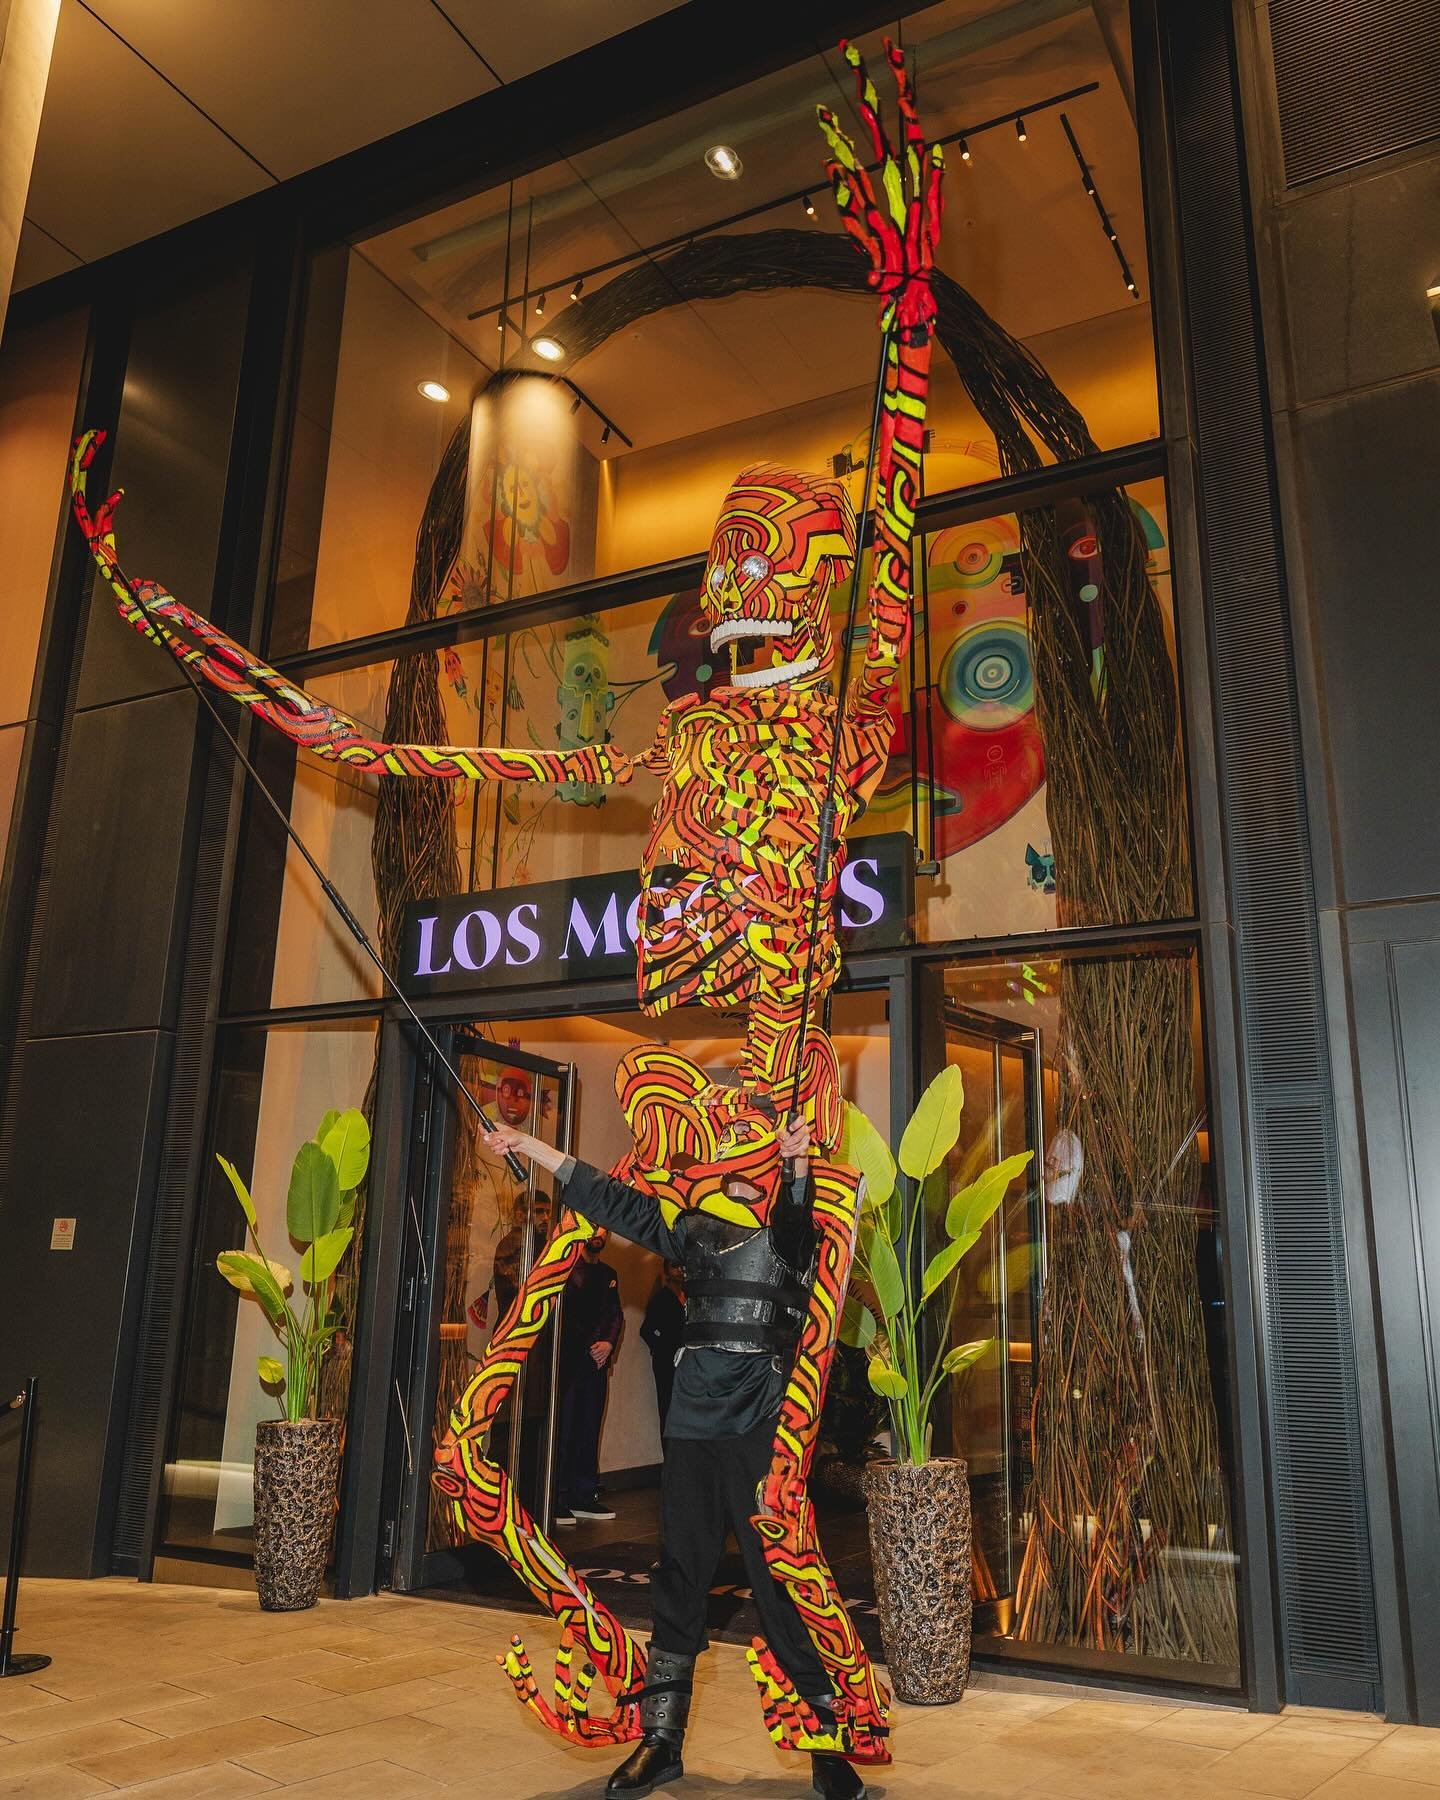 Last night, we celebrated the grand opening of our new flagship restaurant, #LosMochisLondonCity at 100 Liverpool Street ✨

The night saw some surreal entertainment including the live carving of a whole Blue Fin Tuna by our Executive Chef Leonard Tan